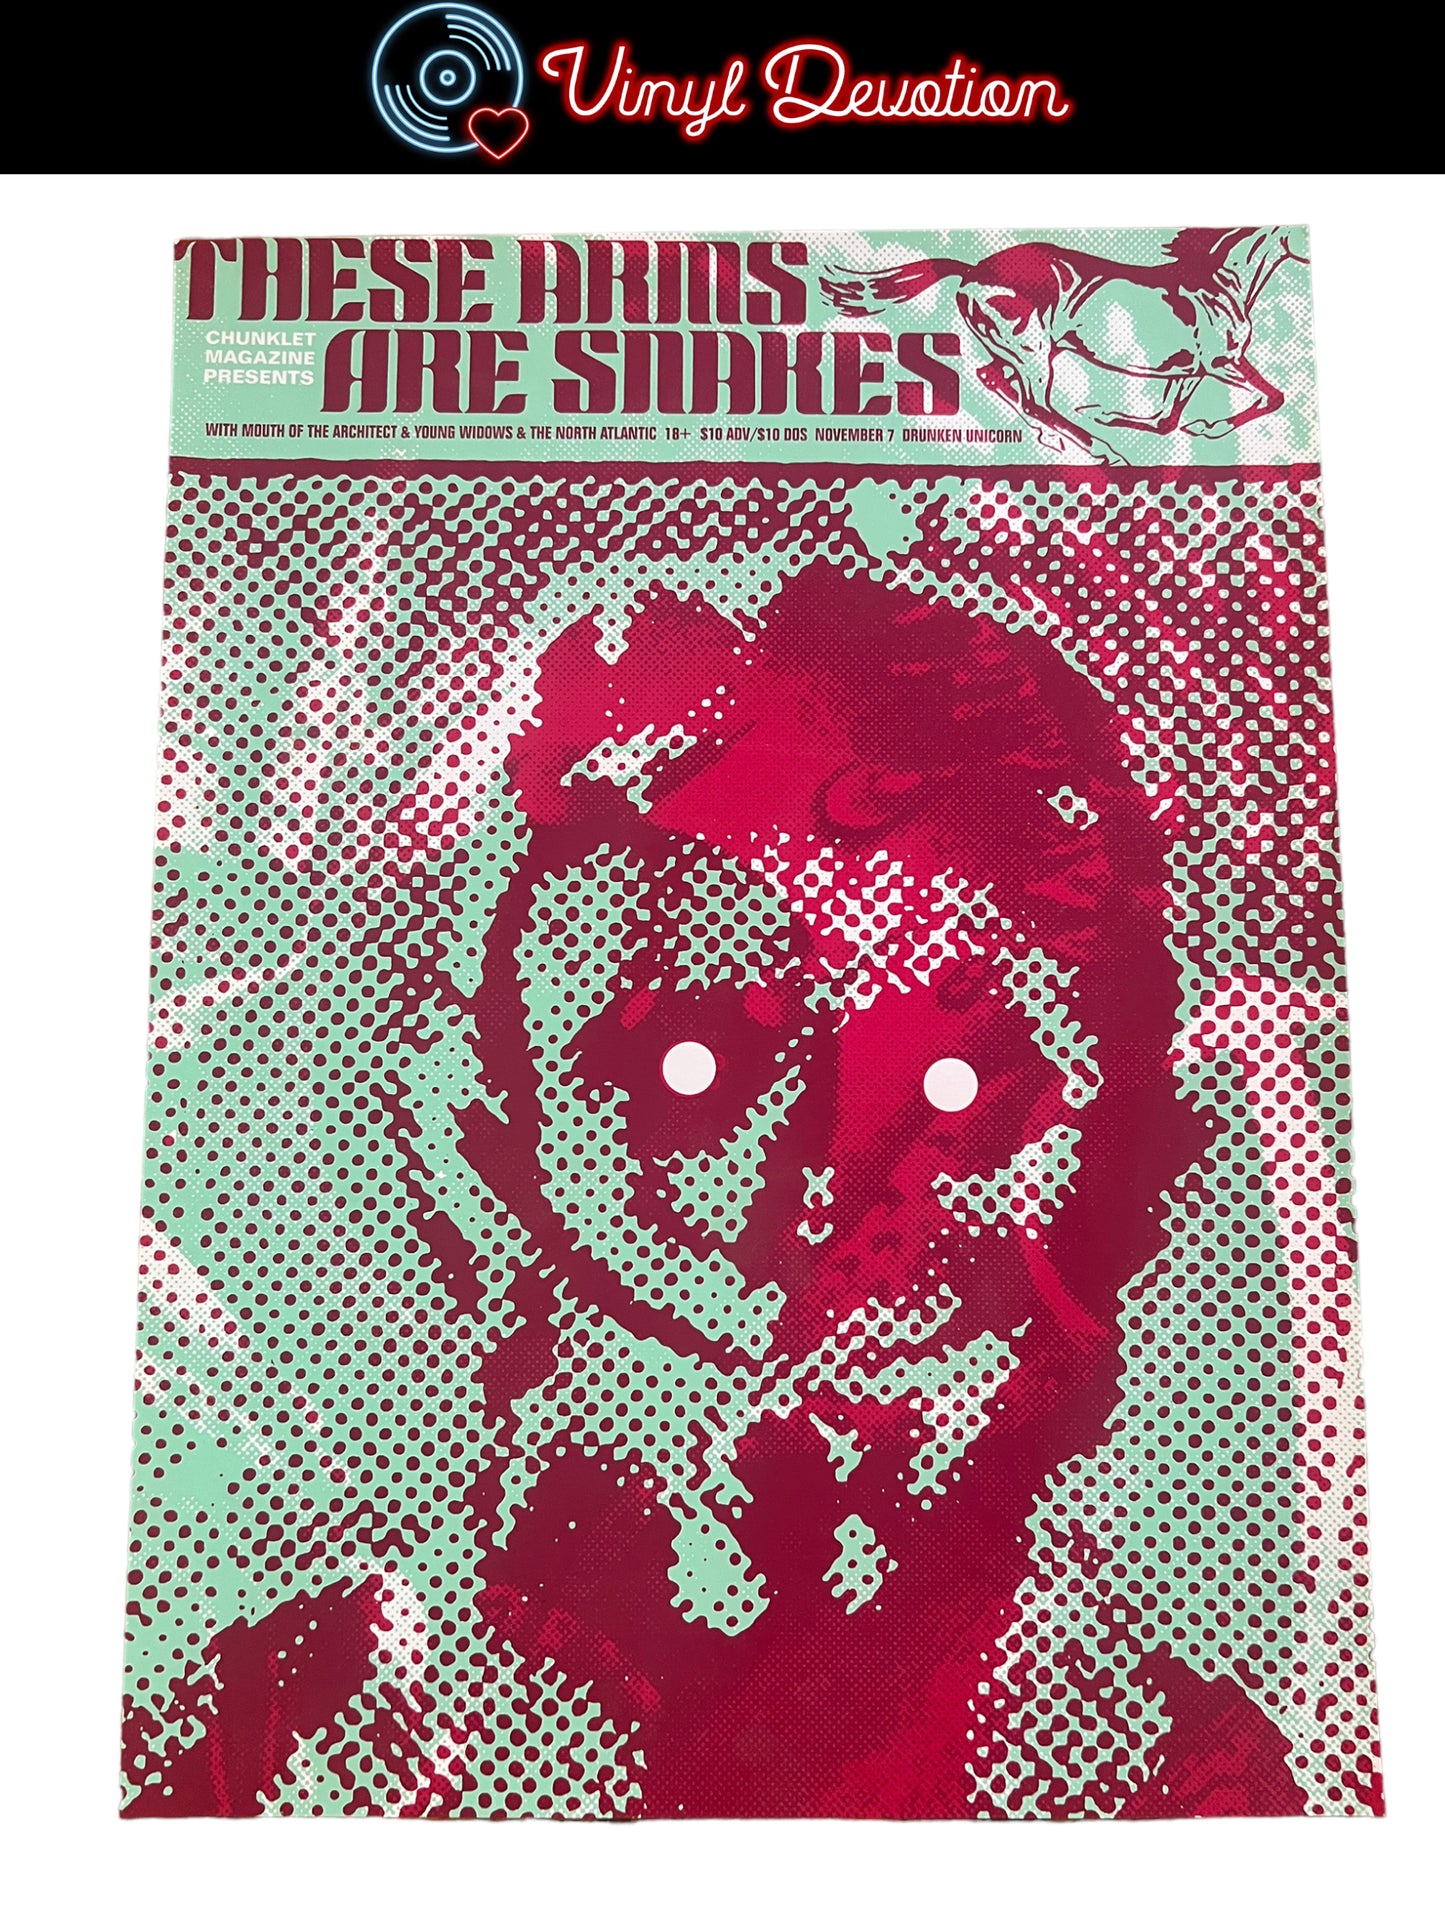 These Arms Are Snakes - Screenprinted Show Poster 2006 Atlanta Zach Hobbs 17 3/4 x 23 1/2 inches